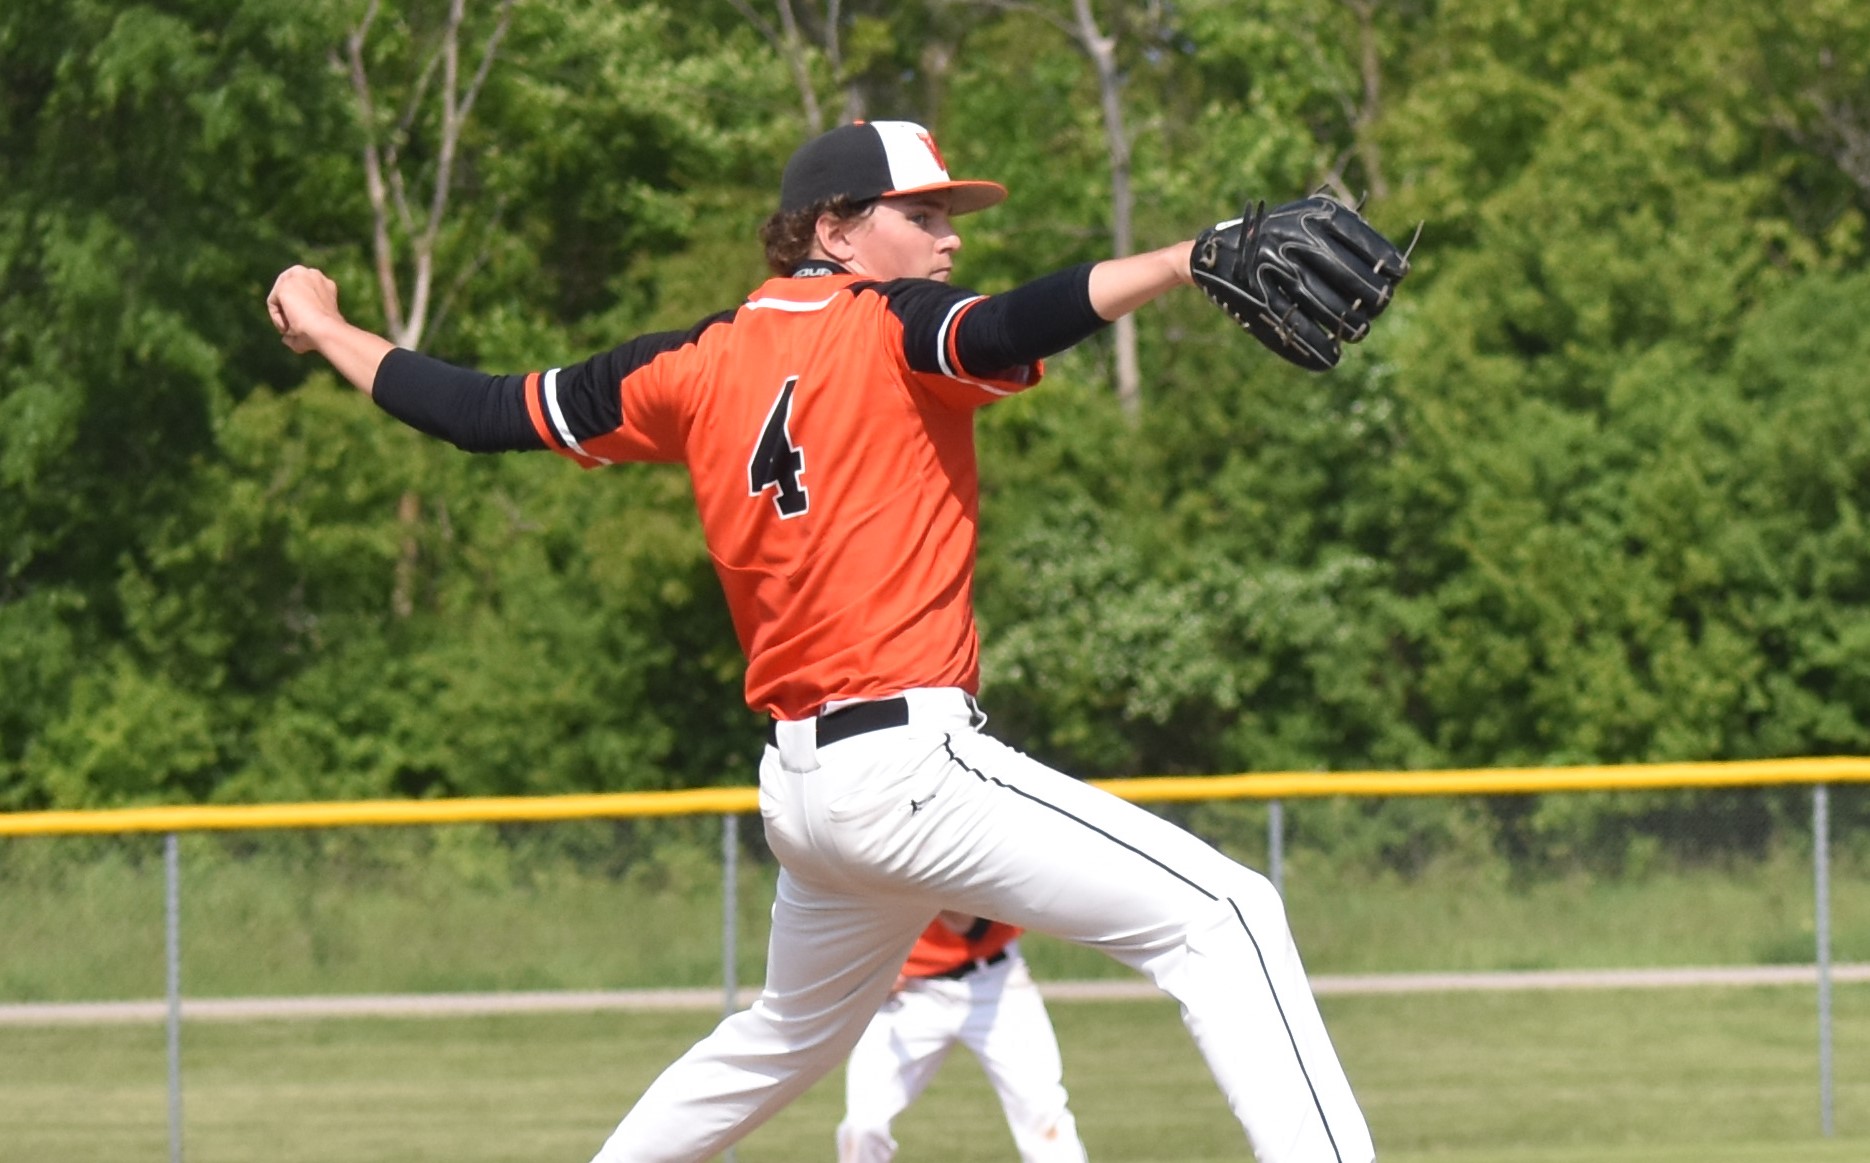 Dupont’s hitting and Langreder’s pitching lead Phantoms to State